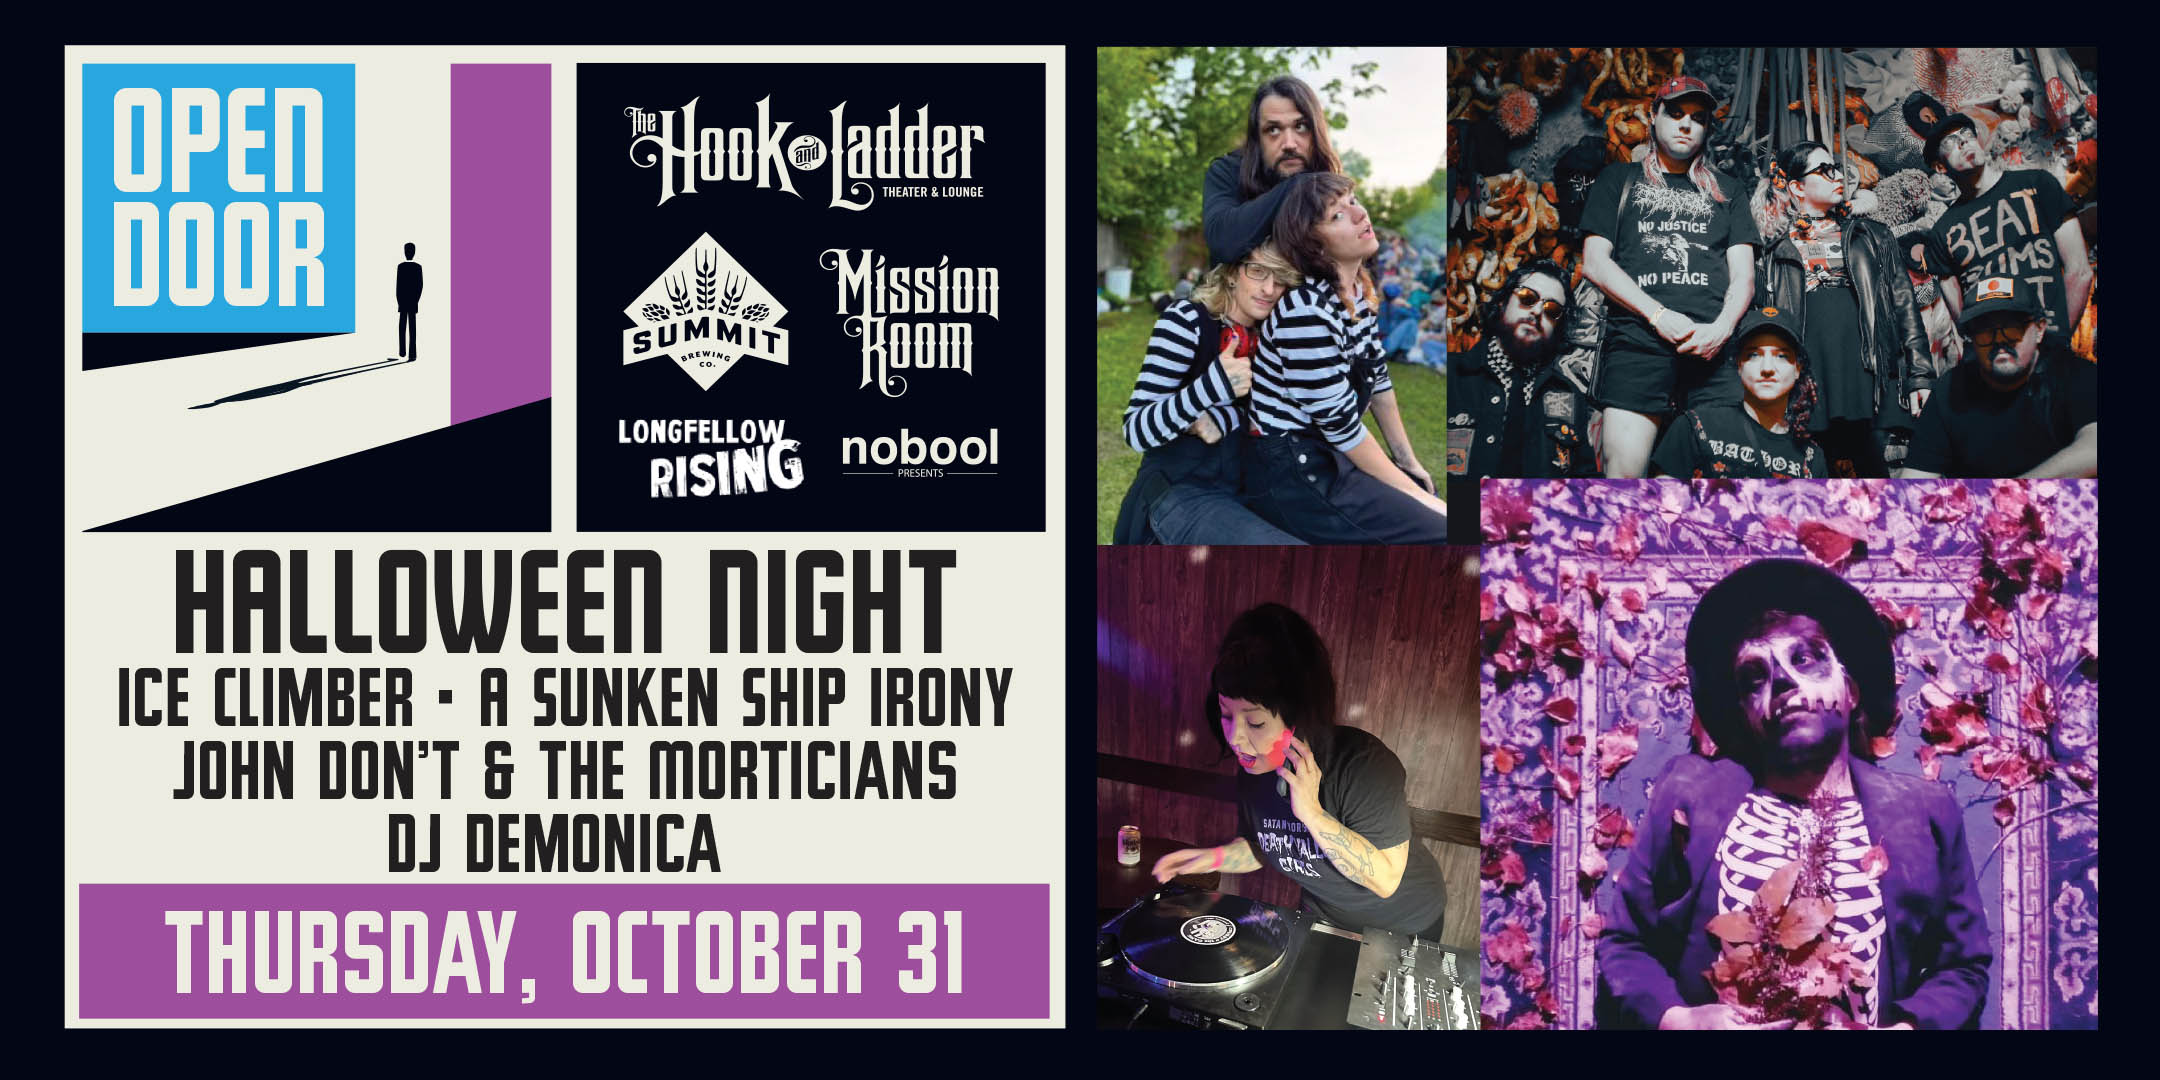 Summit Brewing & Longfellow Rising presents Open Door Series: Halloween Night w/ Ice Climber, Sunken Ship Irony, John Don’t and The Morticians, & DJ Demonica Thursday, October 31 at The Hook and Ladder's Mission Room Doors 5pm :: Music 7-10pm :: 21+ FREE $5.01 Online Advance Donation (Includes a Summit Beer & 21+ Wristband*) $10 Donation at The Door (Includes a Summit Beer & 21+ Wristband*)